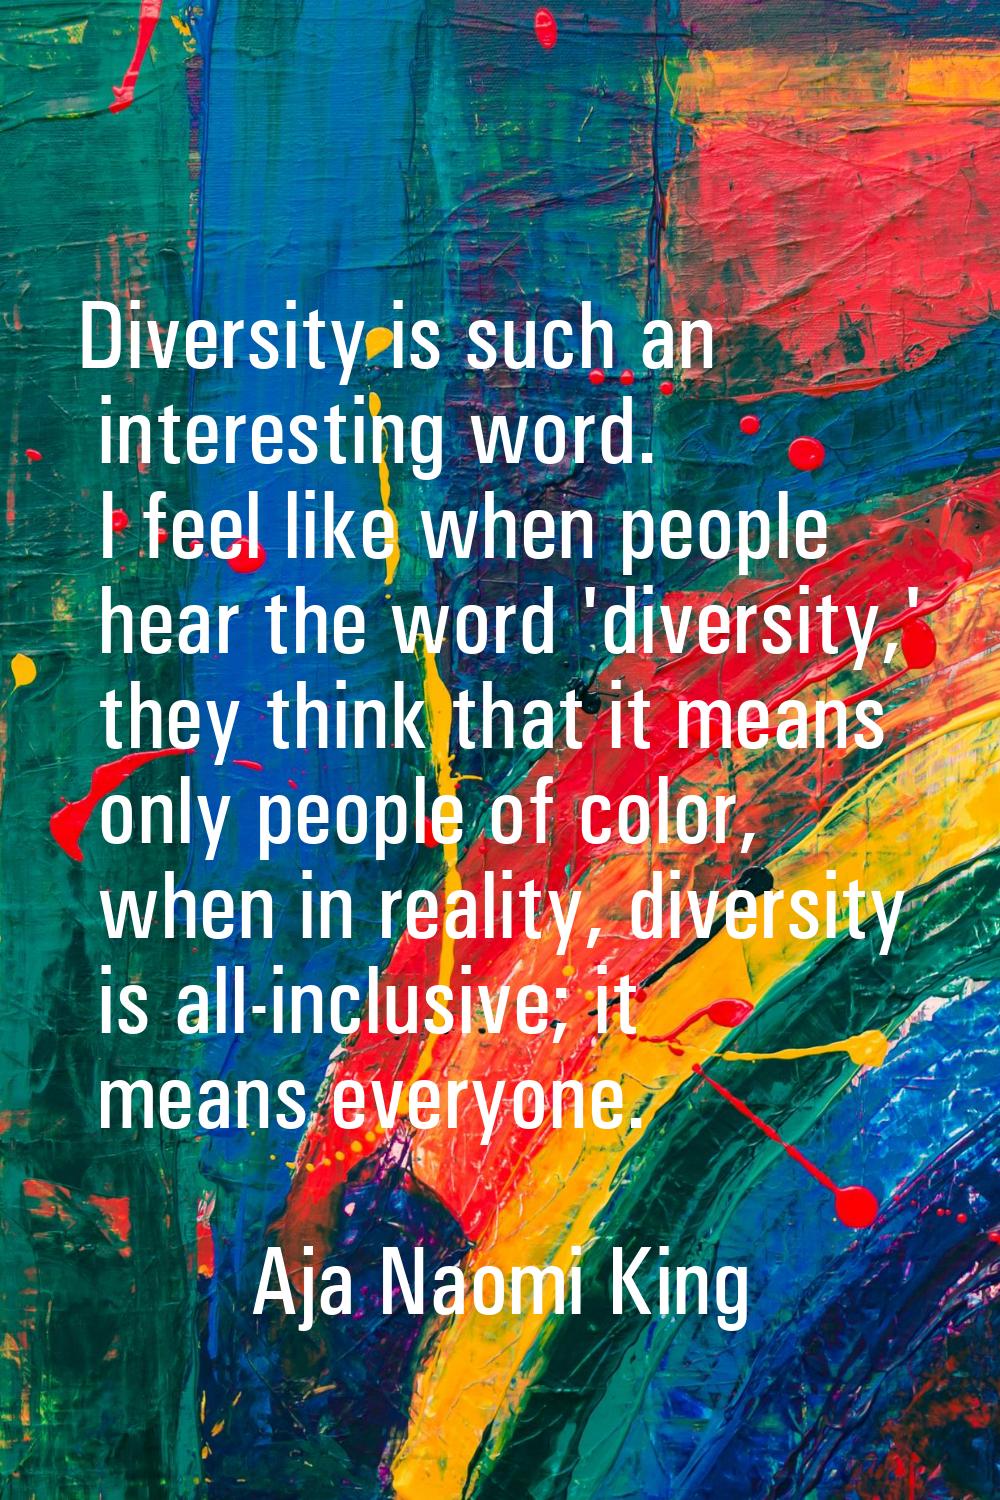 Diversity is such an interesting word. I feel like when people hear the word 'diversity,' they thin